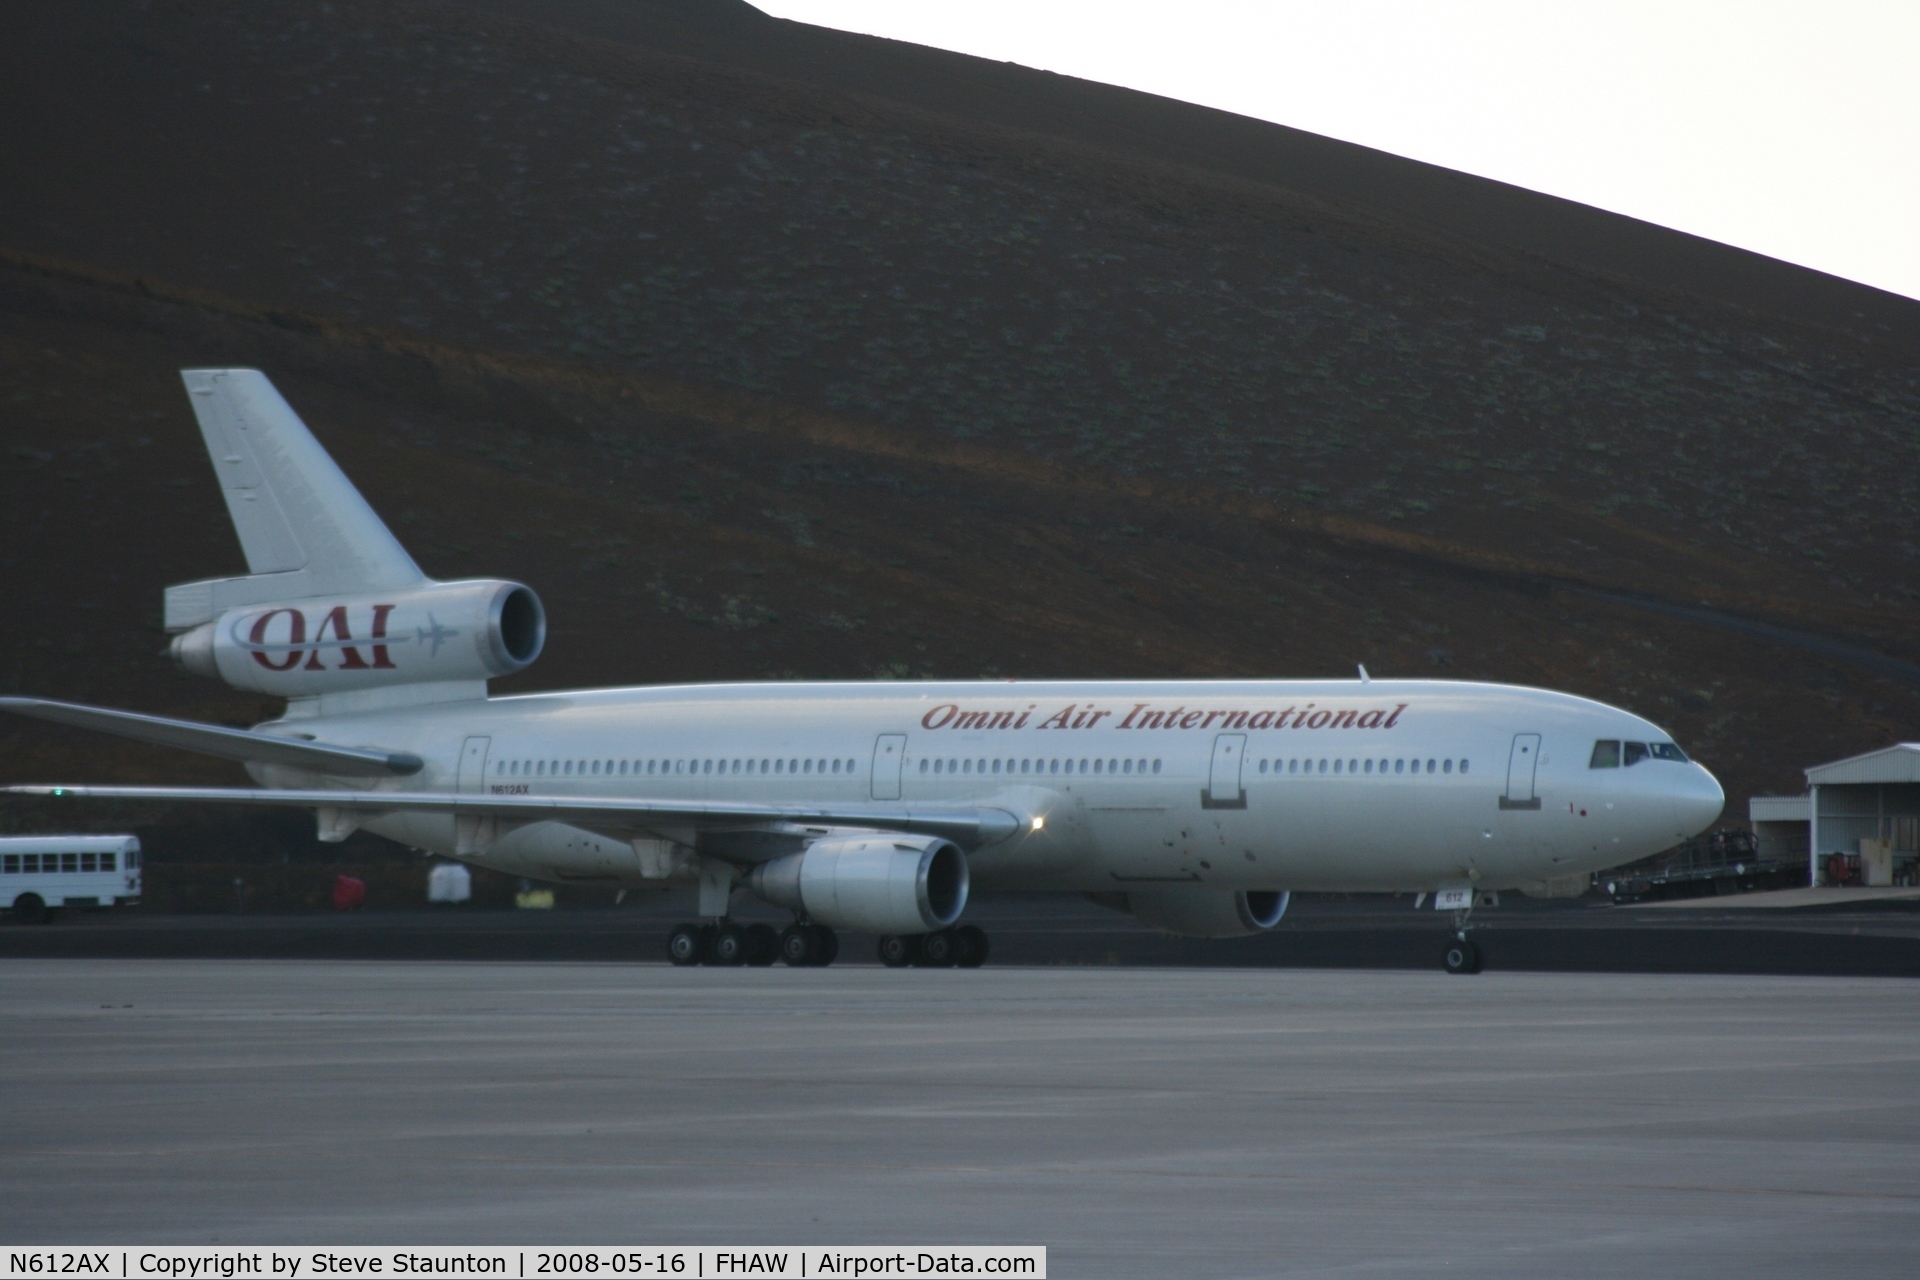 N612AX, 1987 McDonnell Douglas DC-10-30 C/N 48290, Omni Air International DC-10-30 landing and taxiing at Ascension Island. I then flew on it from Ascension to Falkland Islands